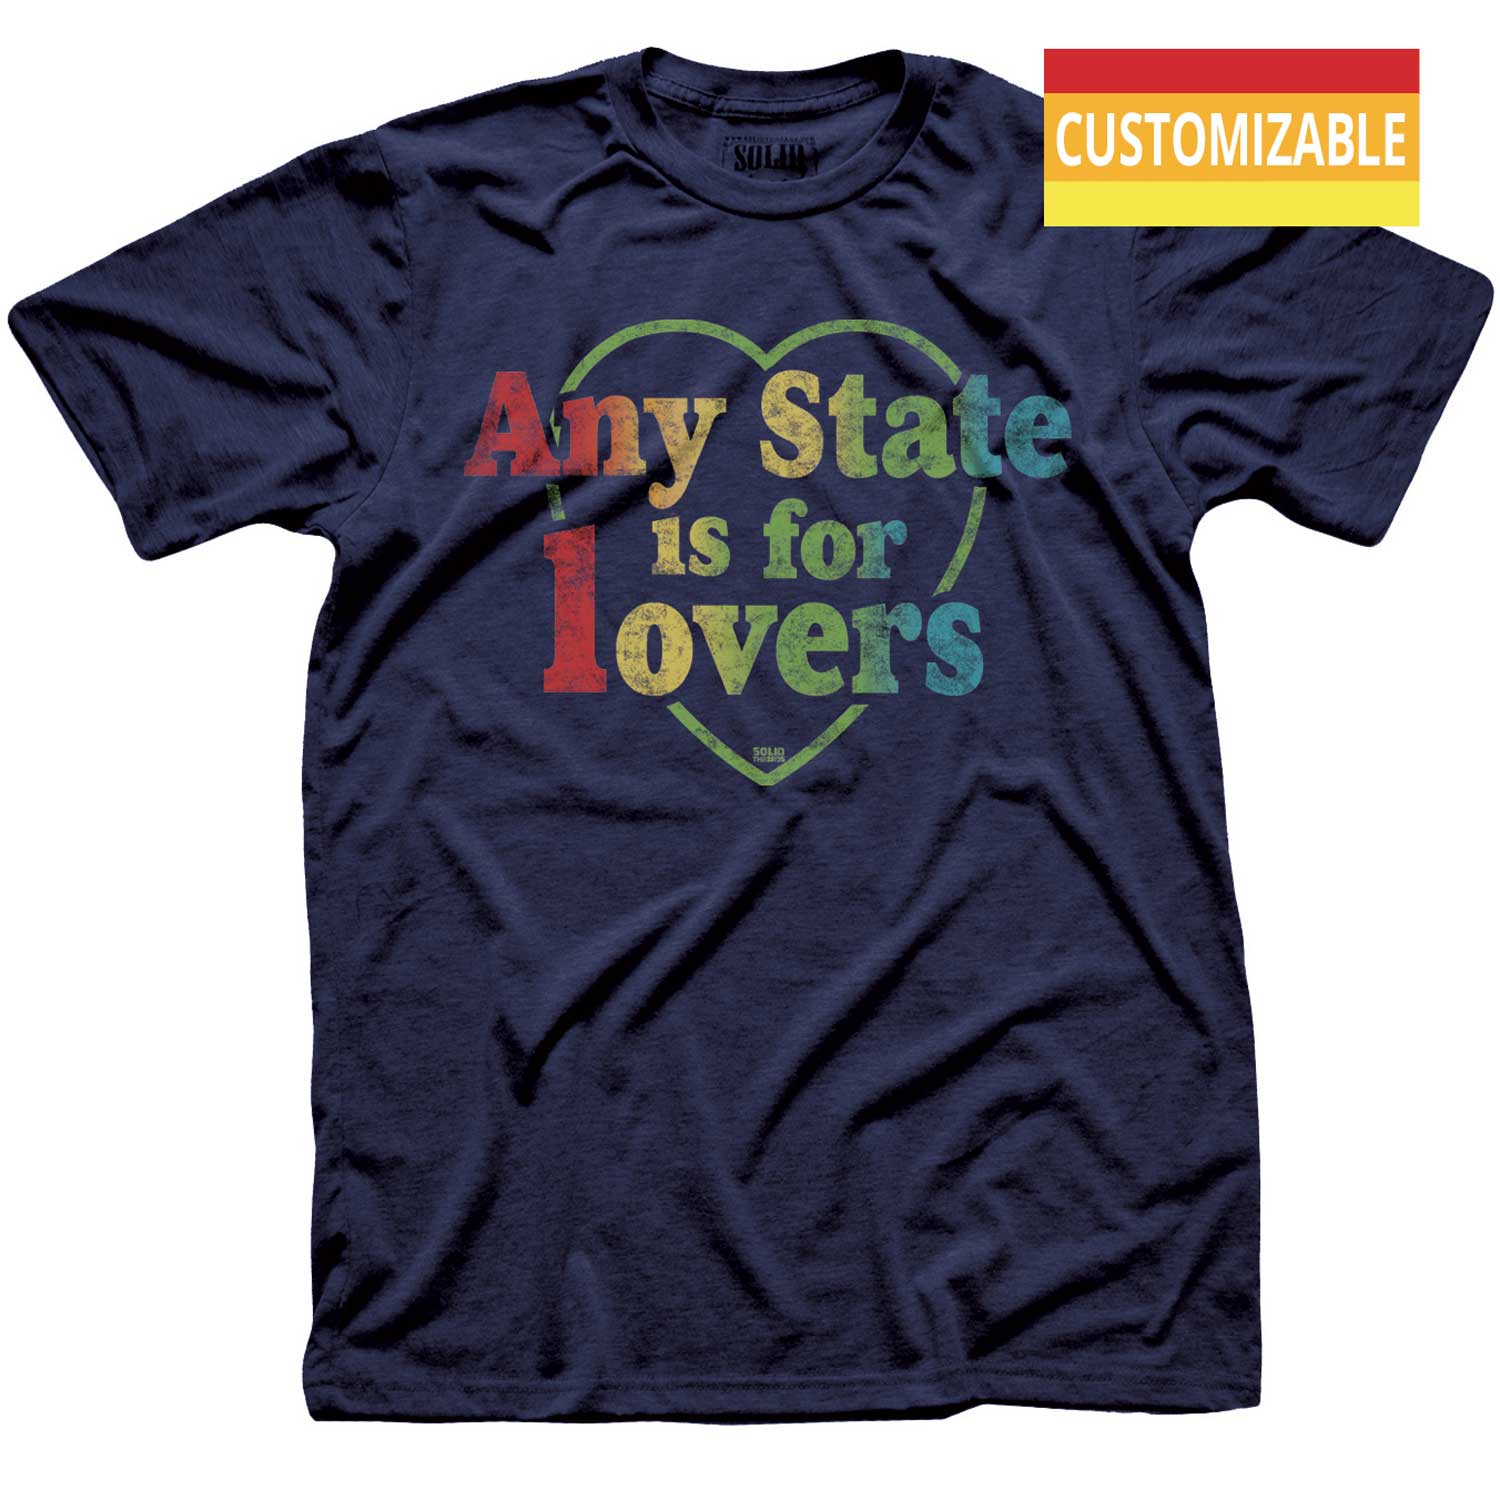 "Any State" is for Lovers Personalized T-shirt